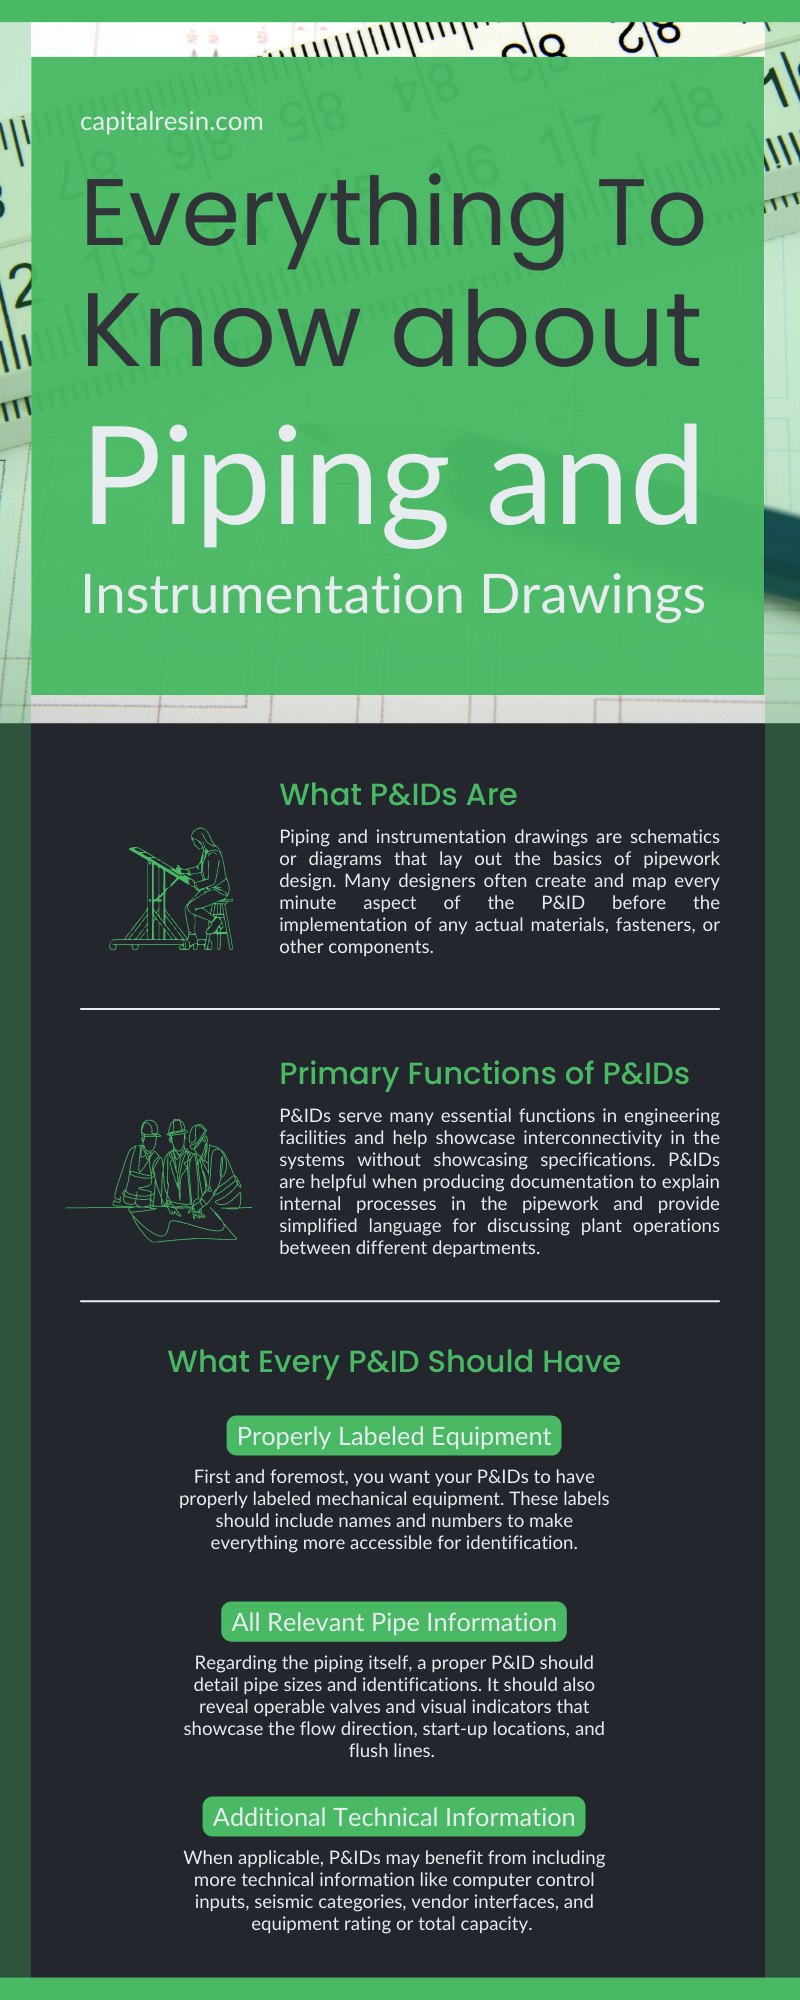 Everything To Know About Piping and Instrumentation Drawings